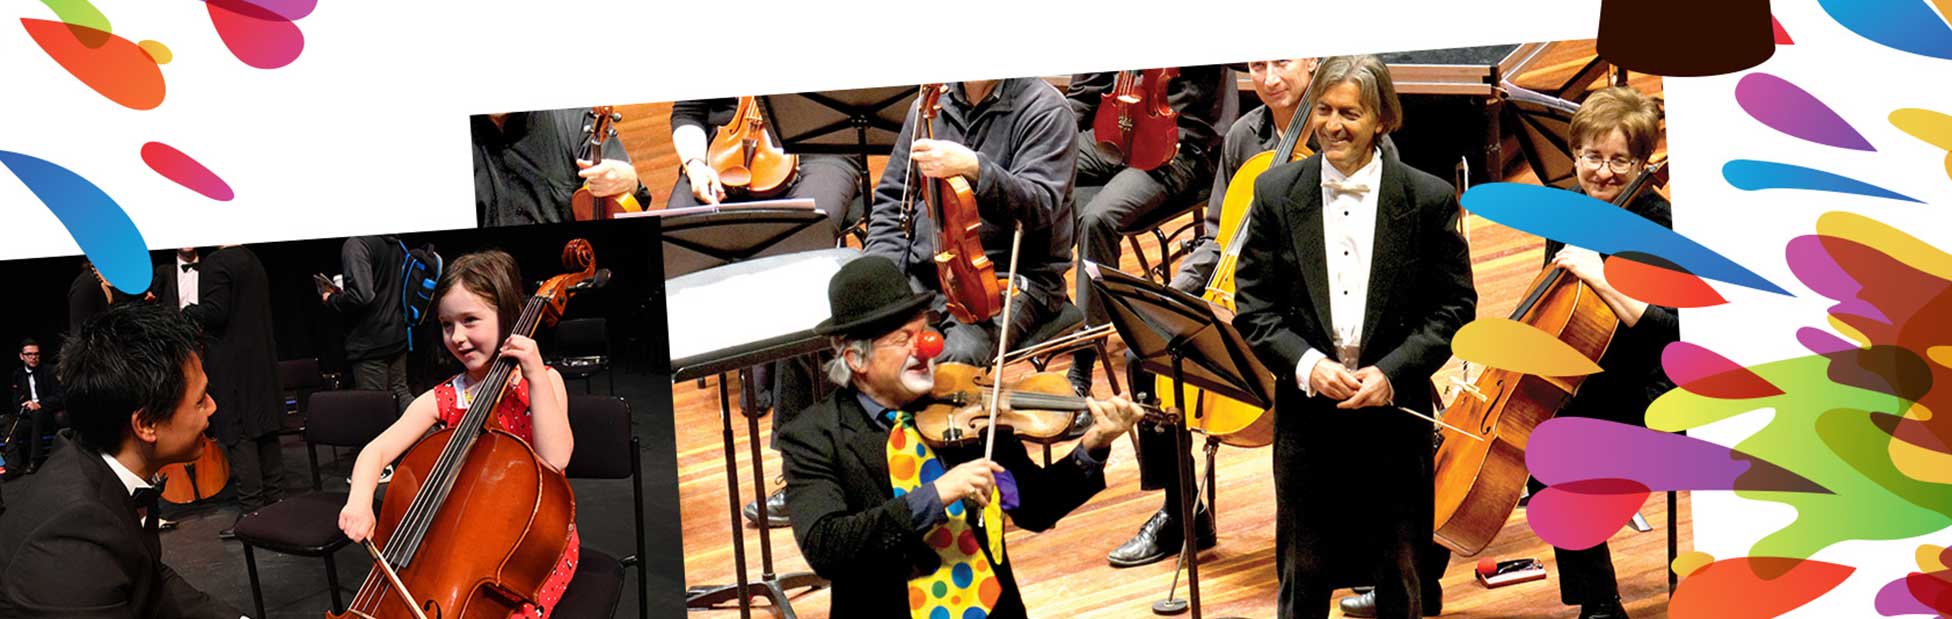 Clown playing violin with conductor watching and smiling